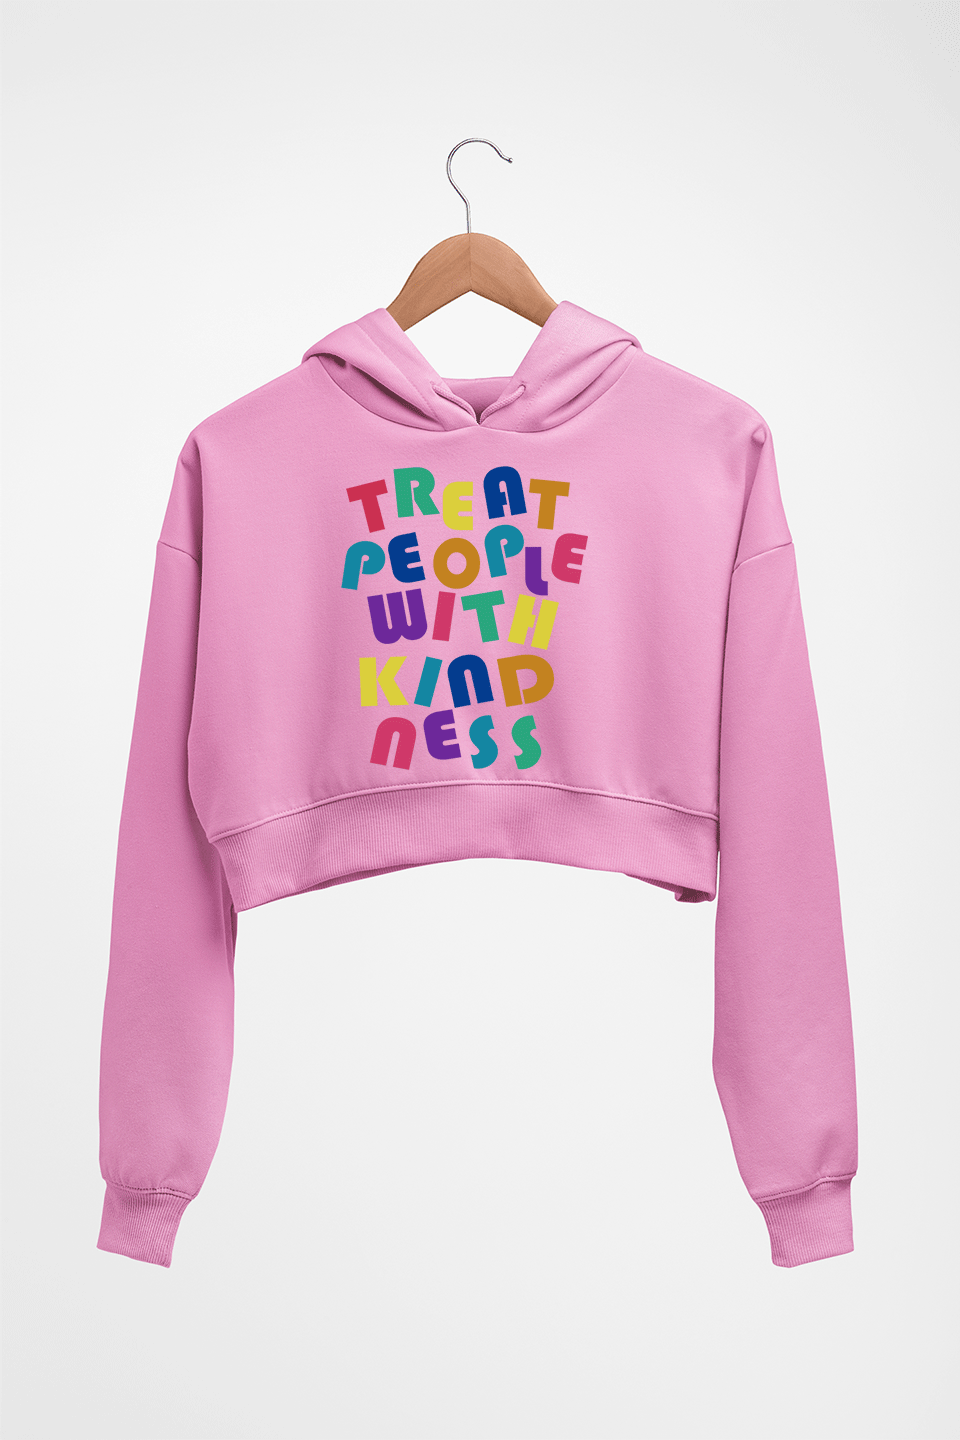 treat people.with kindness harry styles Crop HOODIE FOR WOMEN